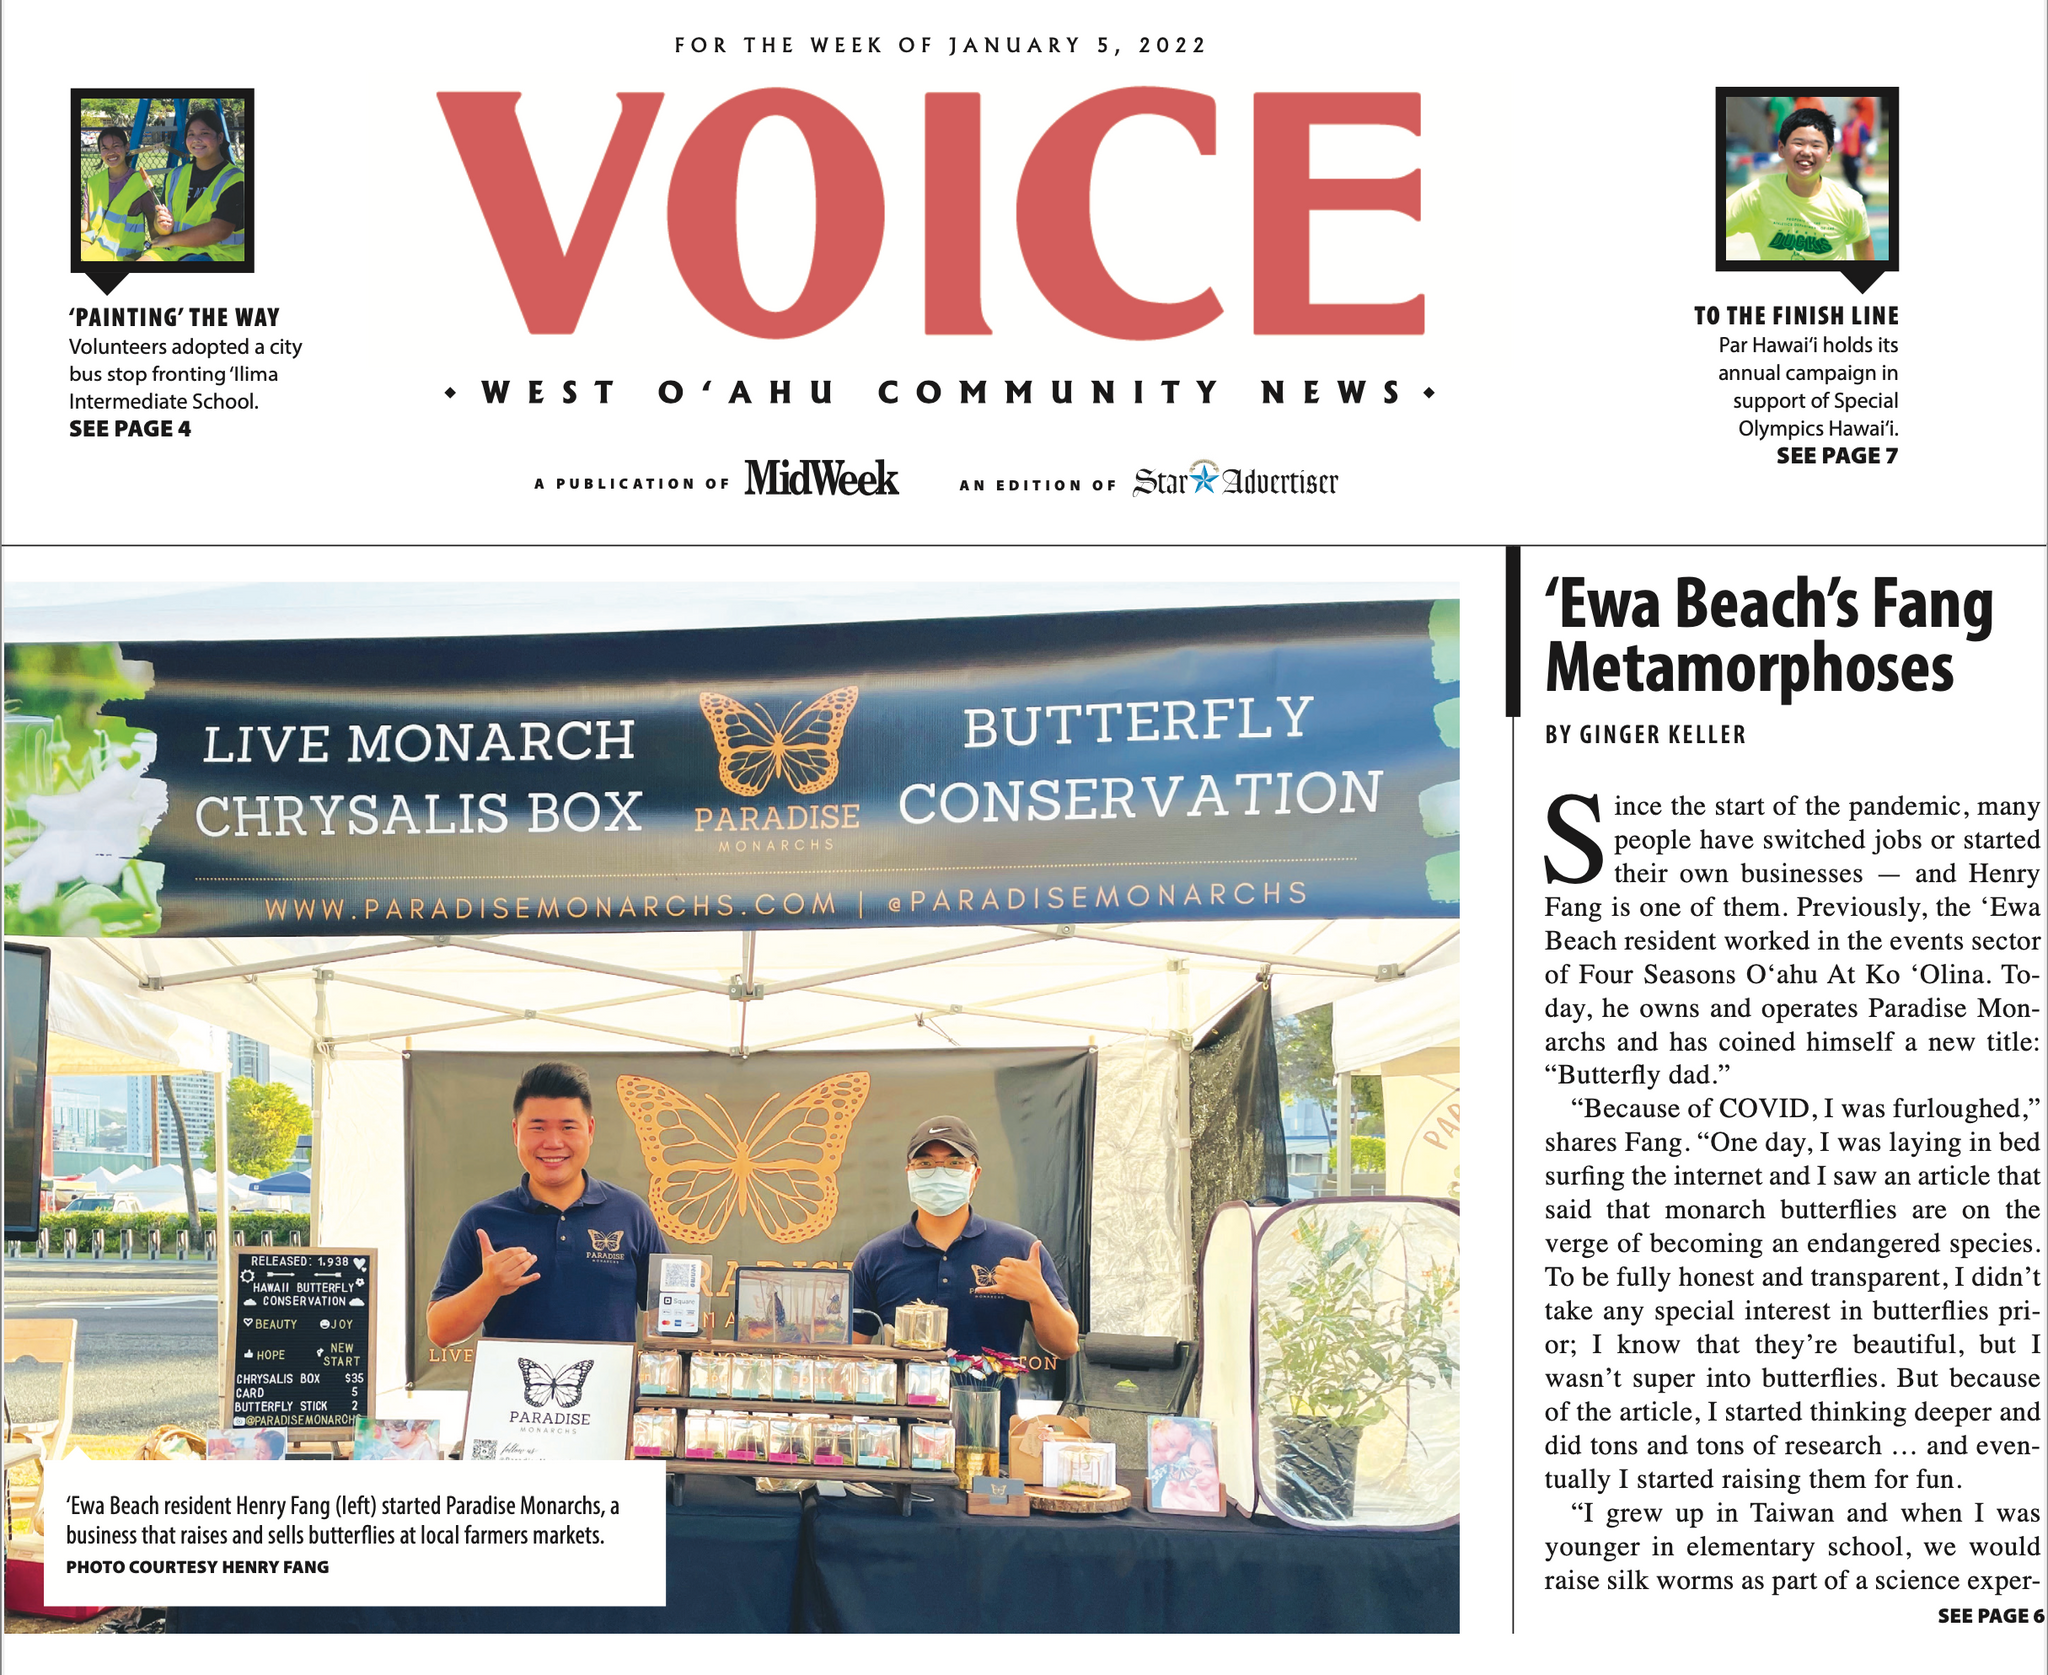 News paper feature in the voice west Oahu community news. An edition of star advertiser newspaper. Our newspaper feature article story. 